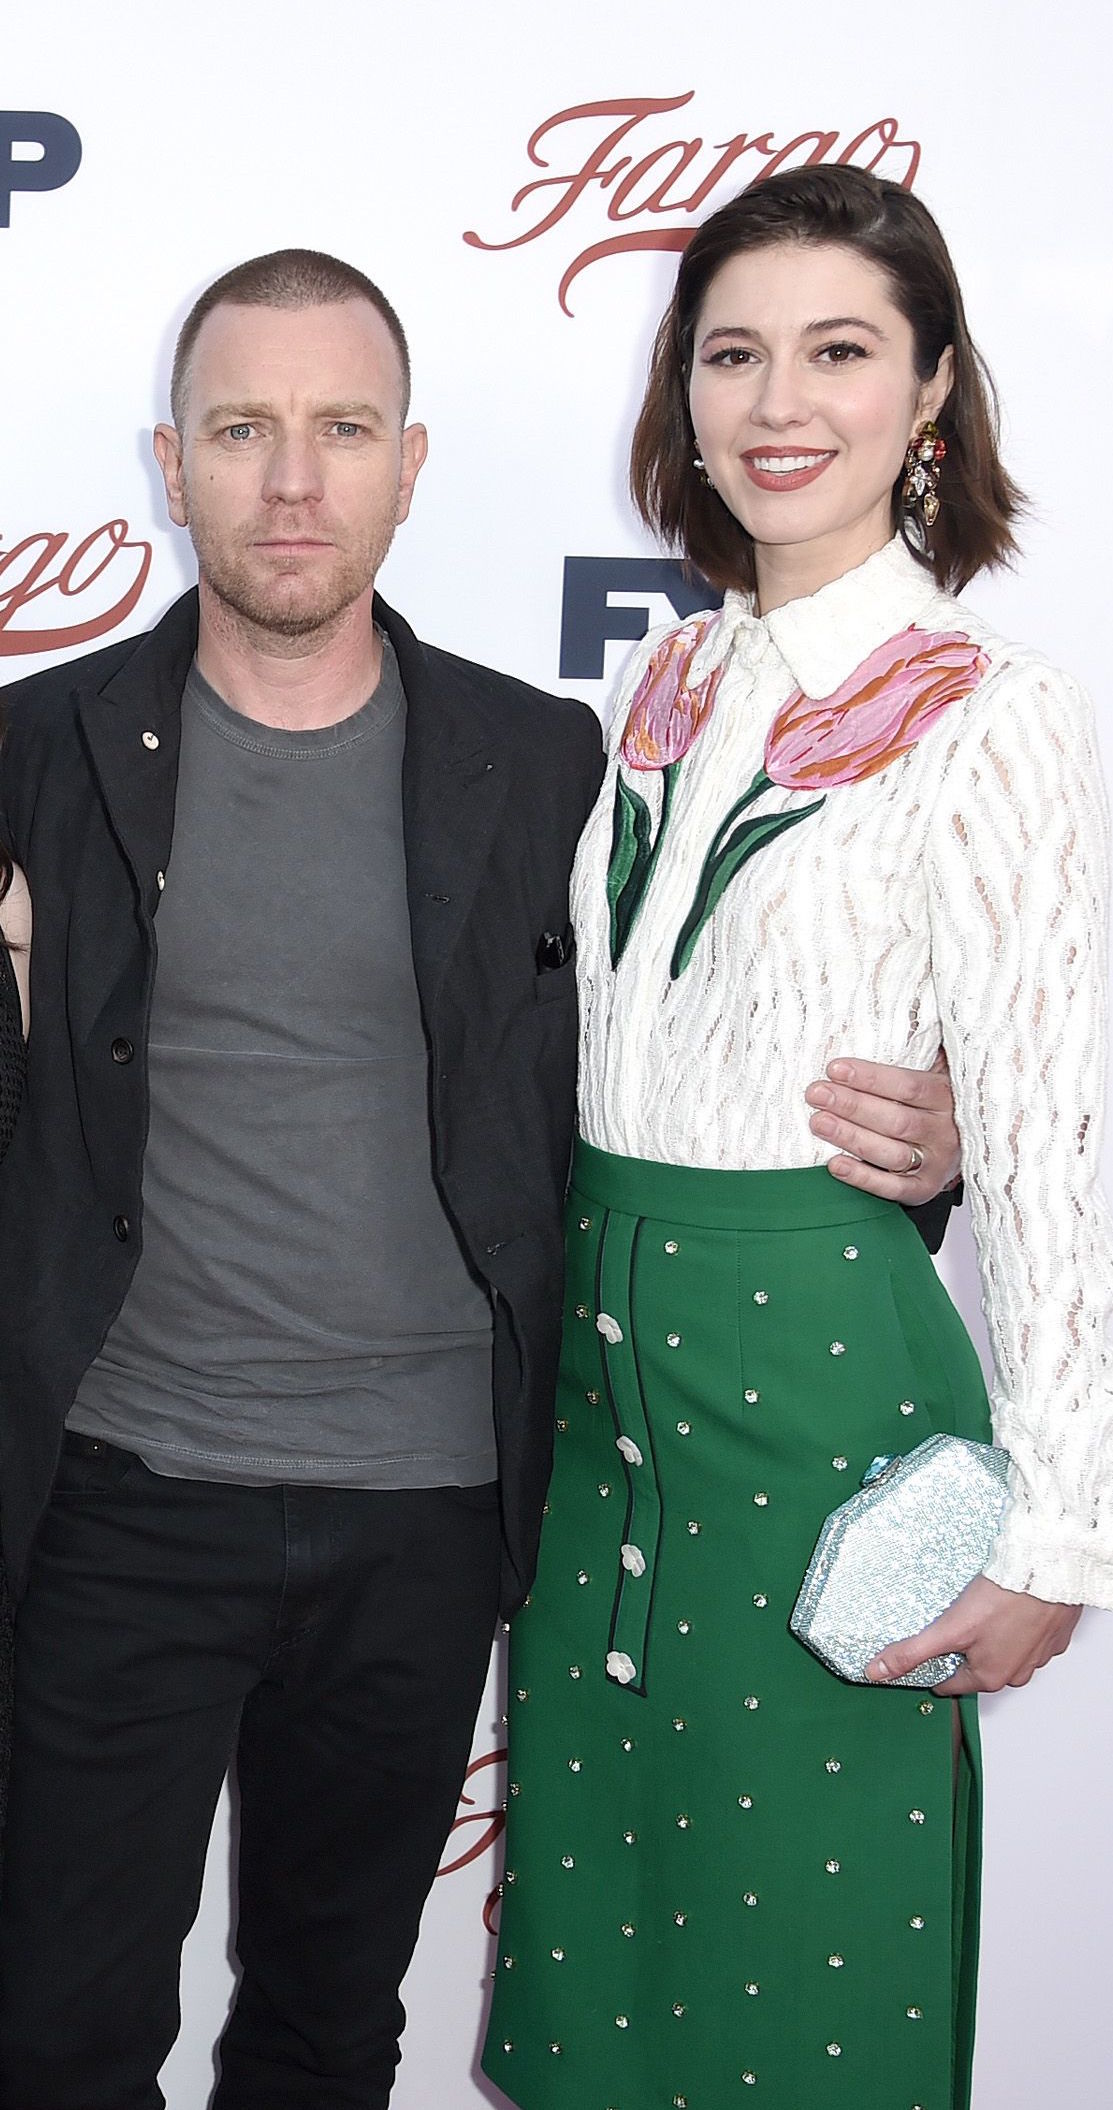 <p>In October 2017, Ewan McGregor was photographed kissing his "Fargo" co-star Mary Elizabeth Winstead at a London cafe. People magazine then reported that he had quietly <a href="https://www.wonderwall.com/news/icymi-celeb-news-oct-22-27-2017-3010307.gallery">separated</a> from his wife of 22 years, Eve Mavrakis -- the mother of his four children -- the previous May. That's the same month Mary announced on Instagram that she and husband Riley Stearns had broken up. Speculation ensued. According to a November 2017 report in the Sun, the actor admitted to Eve, a Greek-French production designer, in May that <a href="https://www.wonderwall.com/news/ewan-mcgregors-wife-convinced-he-cheated-mary-elizabeth-winstead-report-3010834.article">he was in love with his co-star</a> "but insisted nothing had happened," the newspaper reported. In the same report, a source said that "Eve is sure Ewan and Mary were together before he confessed his feelings for her. It is hard for her to believe him." Ewan filed for divorce in January 2018, the same month he made headlines when he <a href="https://www.wonderwall.com/awards-events/golden-globes/golden-globes-2018-whats-buzzing-what-had-everyone-talking-trending-3011787.gallery?photoId=1018083">awkwardly thanked both Eve and Mary</a> in his speech after he won a Golden Globe for his work in "Fargo." Ewan and Mary welcomed a baby together, son Laurie, in 2021.</p>